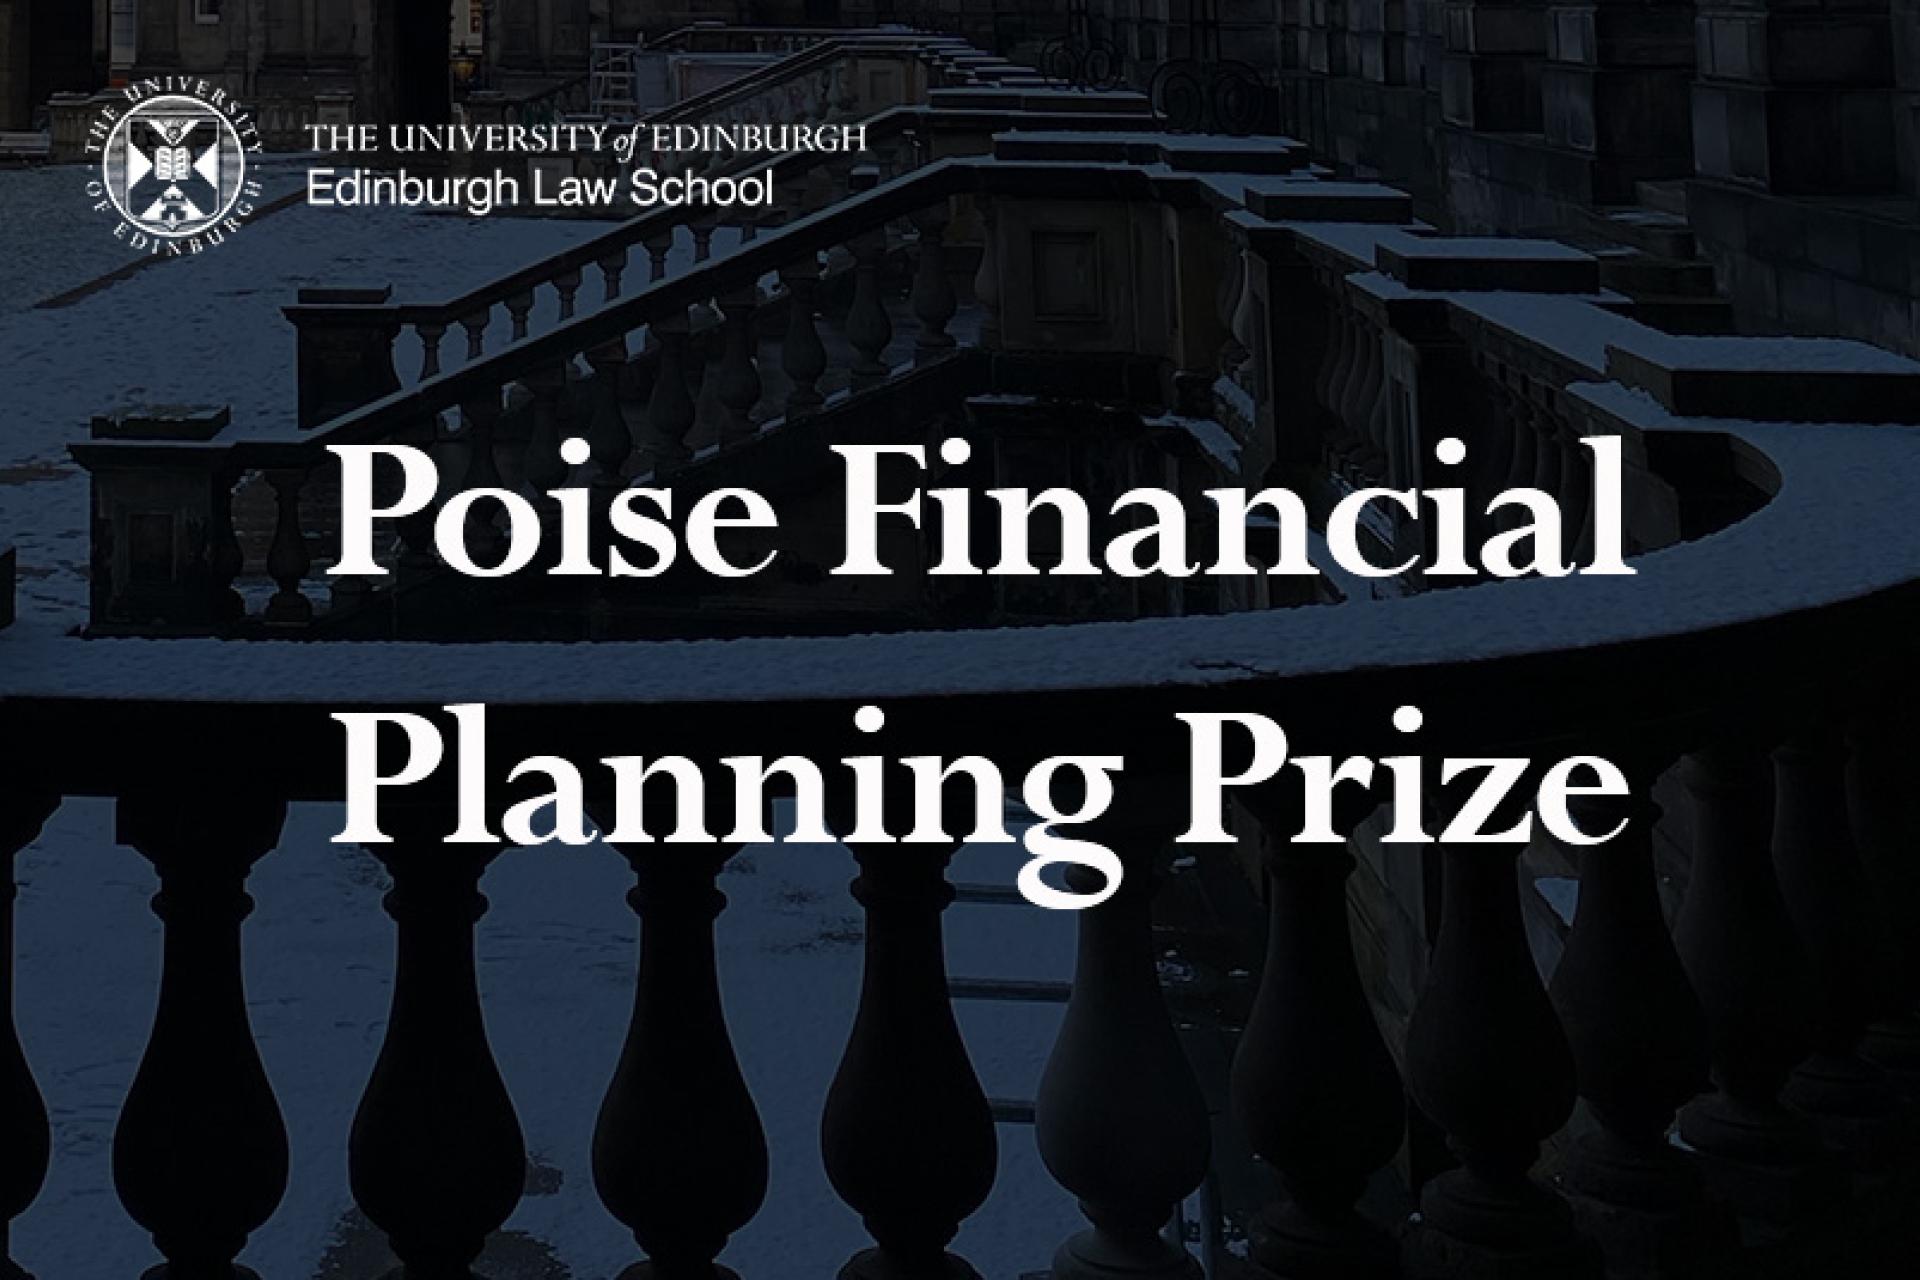 Poise Financial Planning Prize